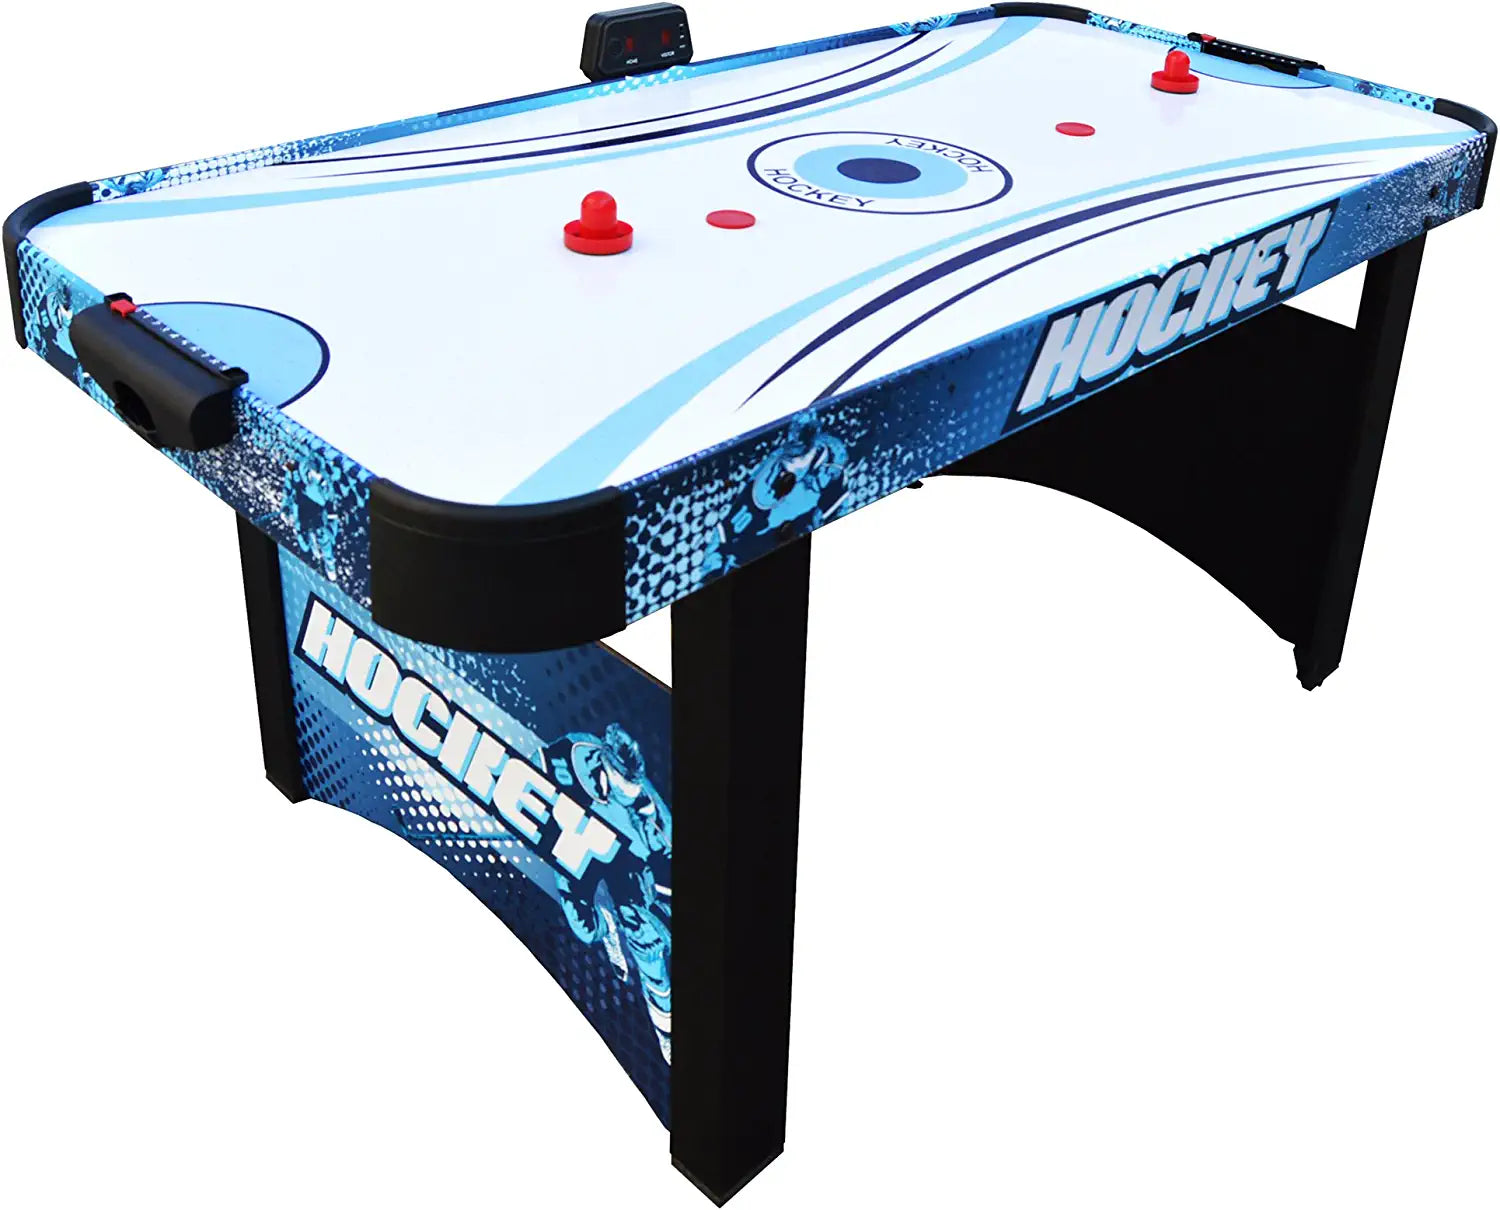 Hathaway Enforcer Air Hockey Table 5.5-ft for Kids with Electronic Scoring for Family Game Rooms √É¬¢√¢‚Äö¬¨√¢‚Ç¨≈ì Blue/White